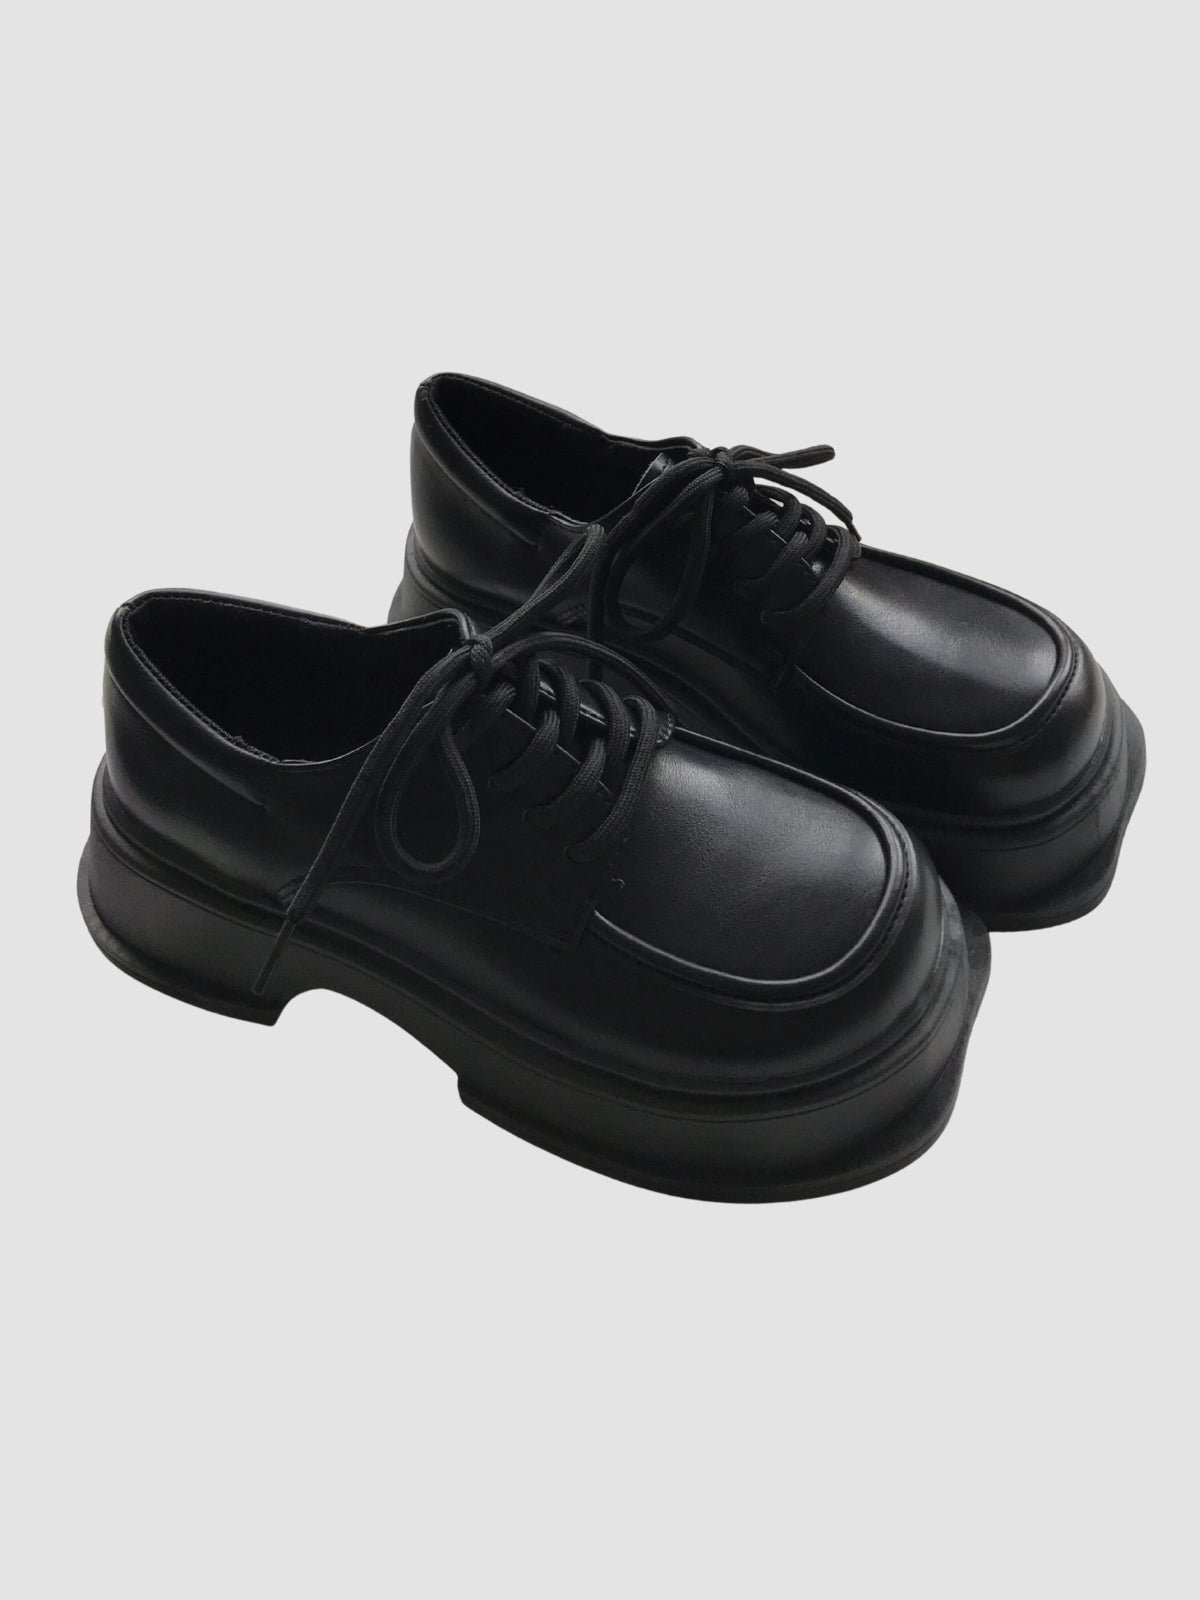 WLS Retro Leather Lace Up Women Shoes